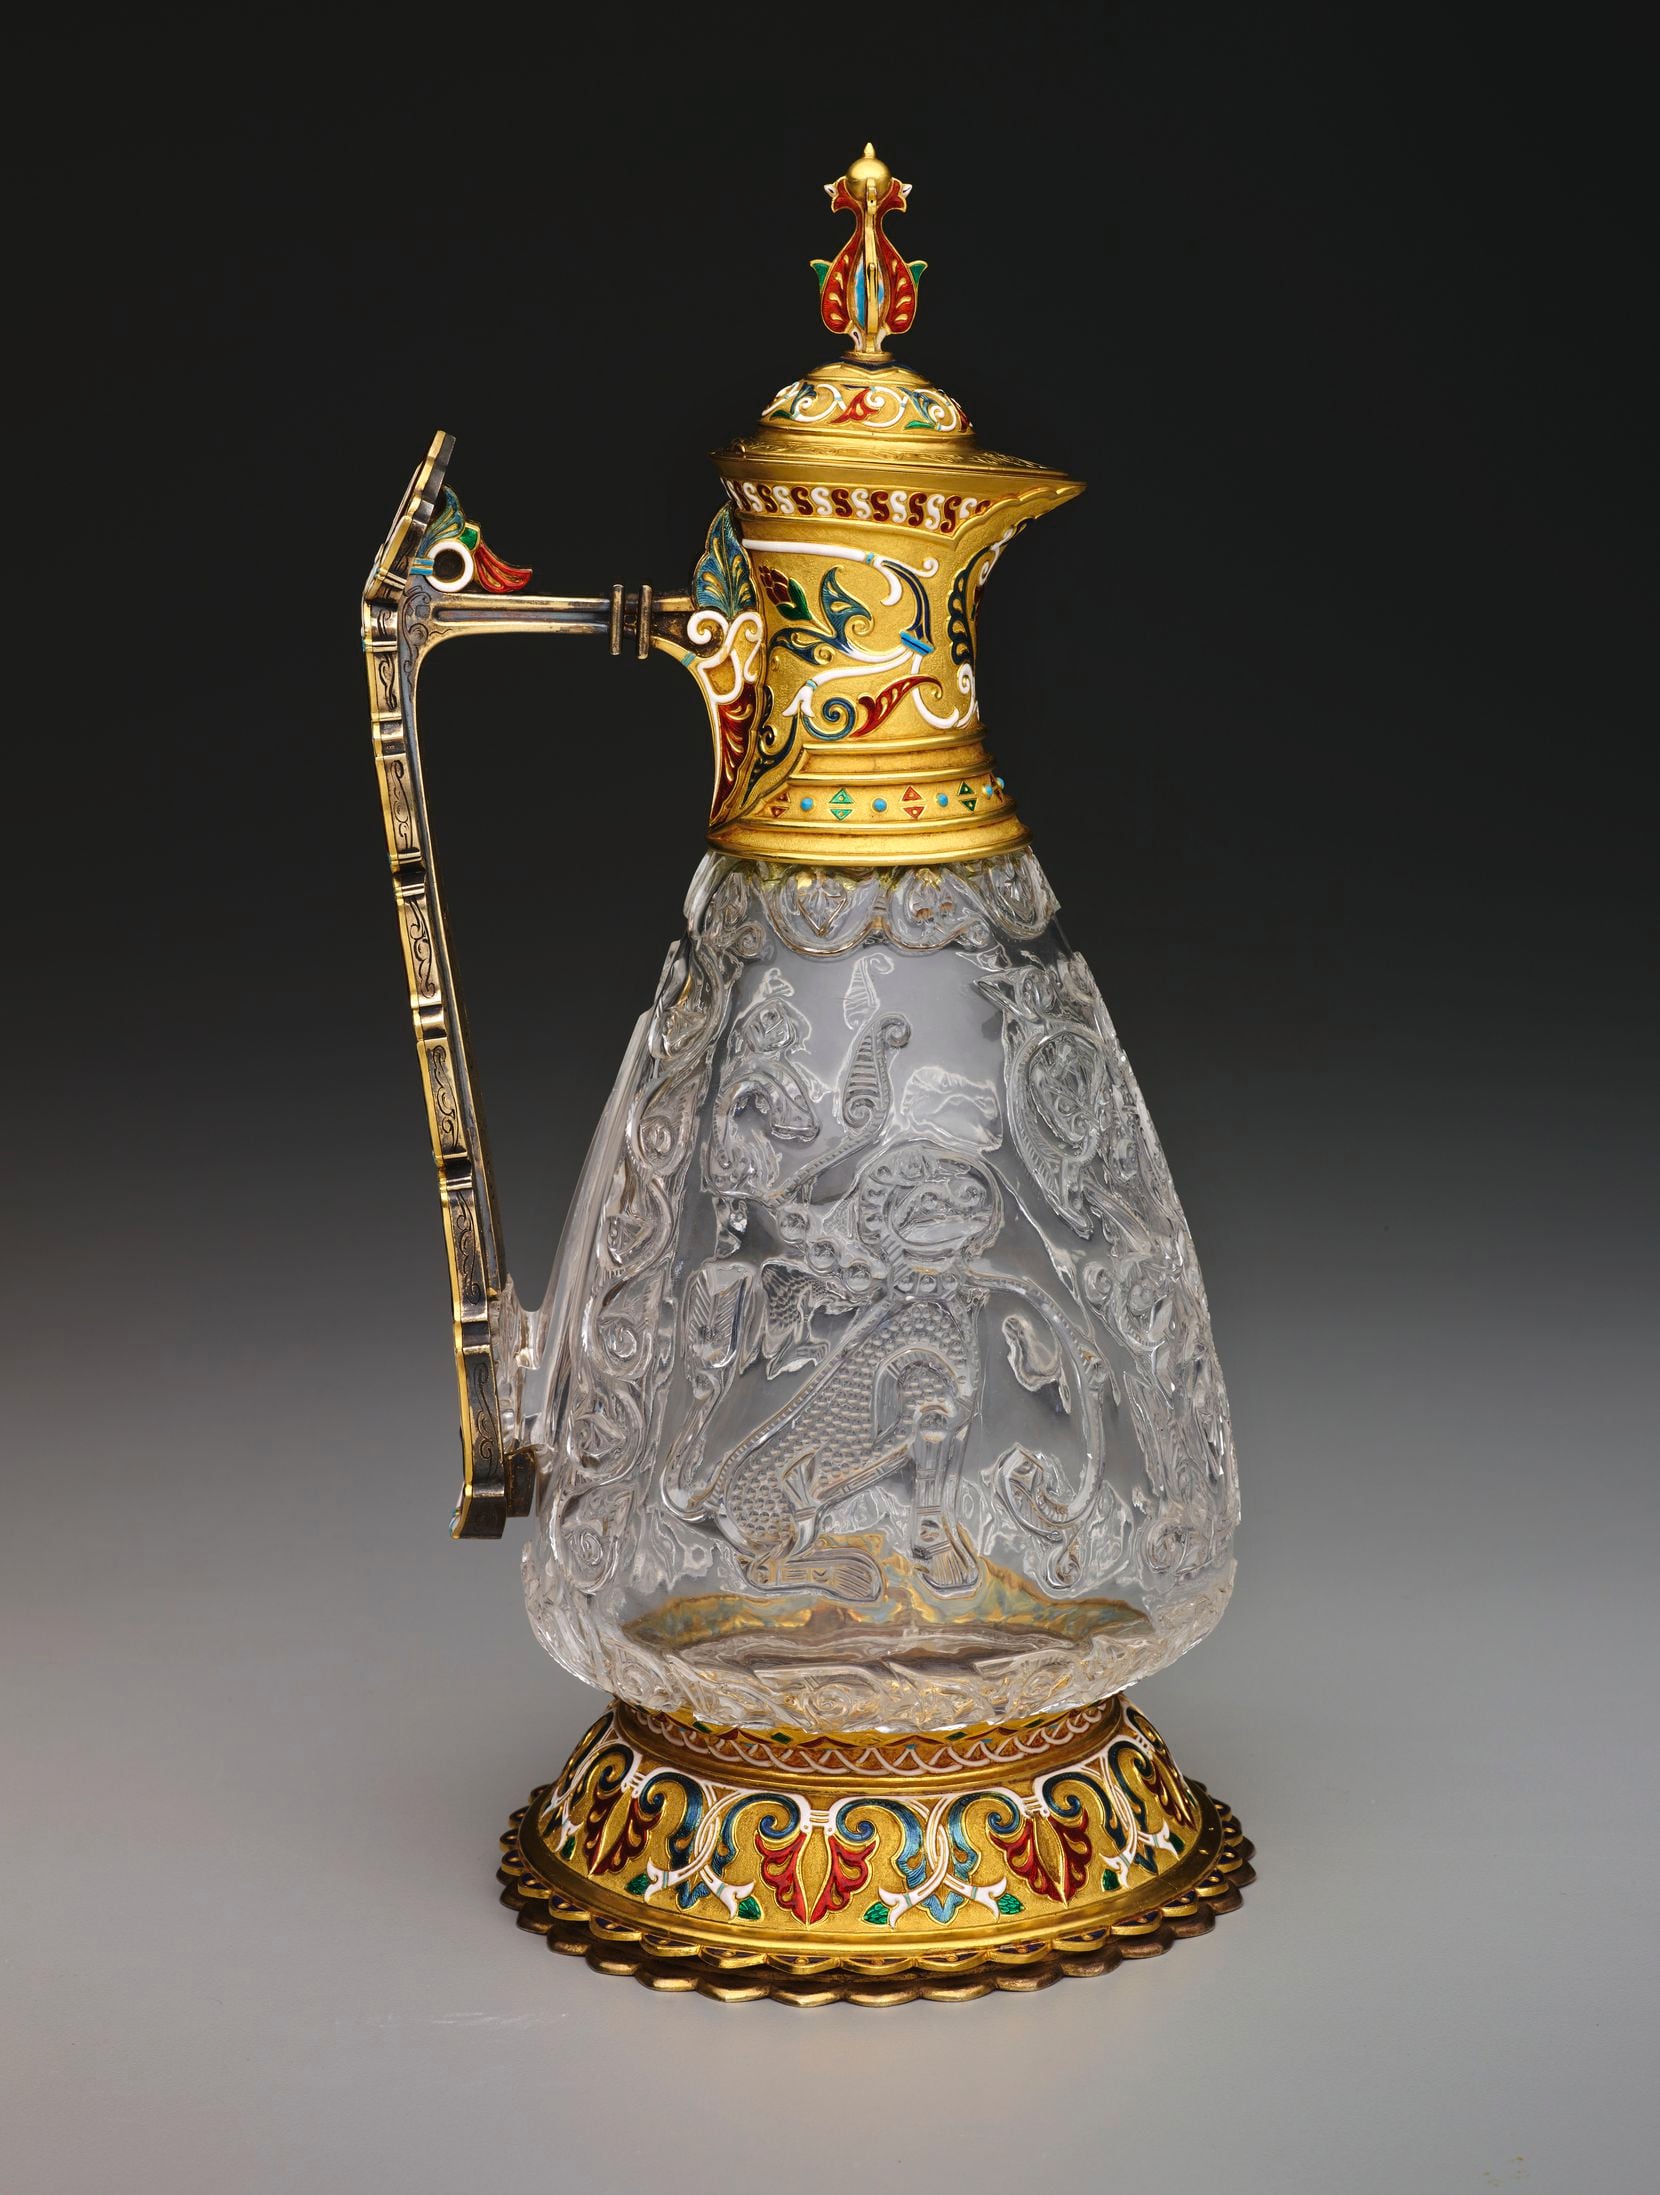 Ewer, late 10th-early 11th century, rock crystal, with enameled gold repairs and fittings by...